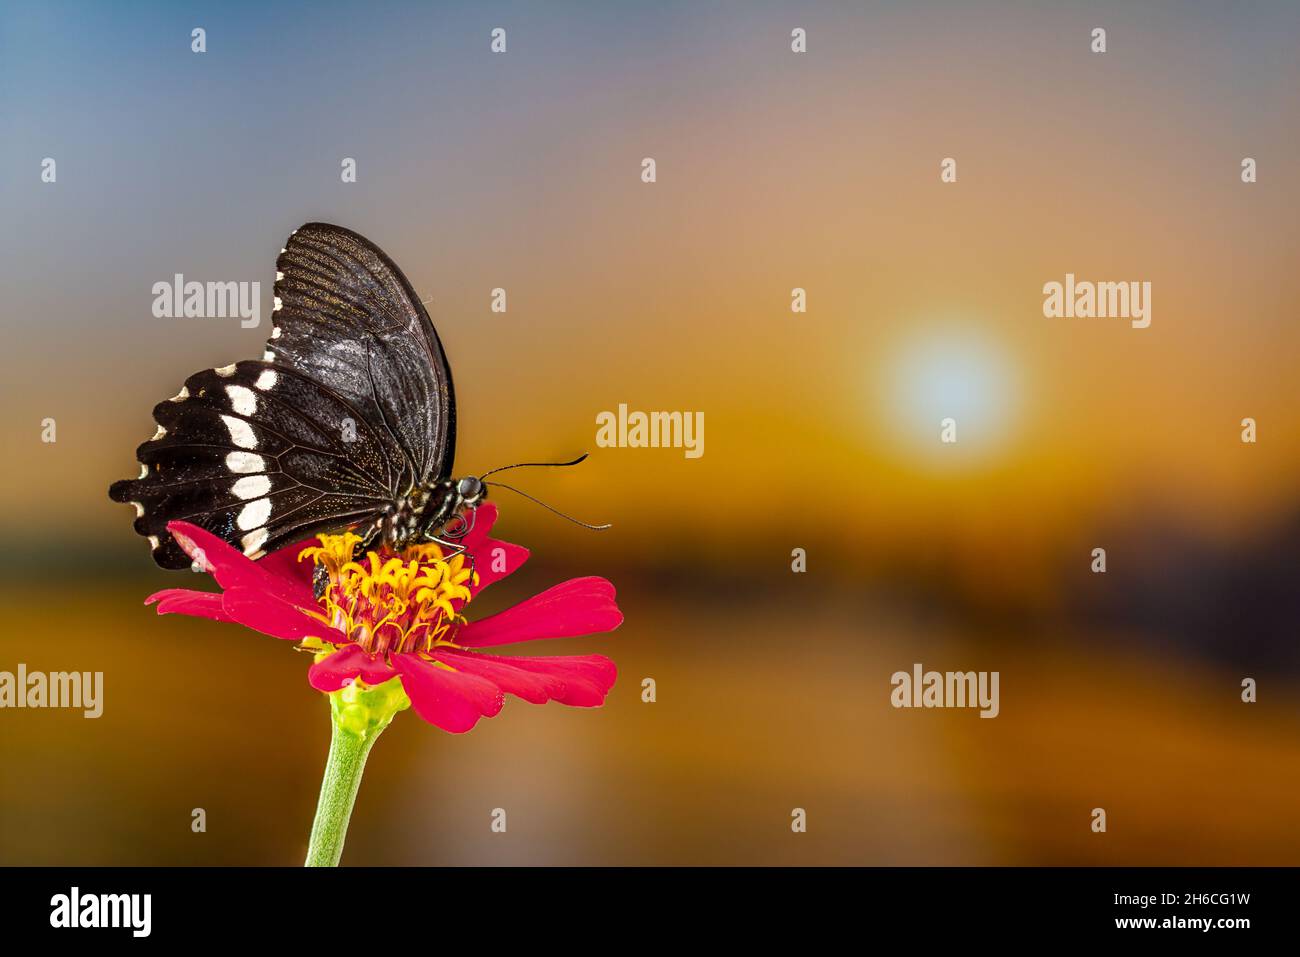 A brown butterfly perched on a red zinnia flower, has a background of autumn leaves and warm sunlight, copy space Stock Photo